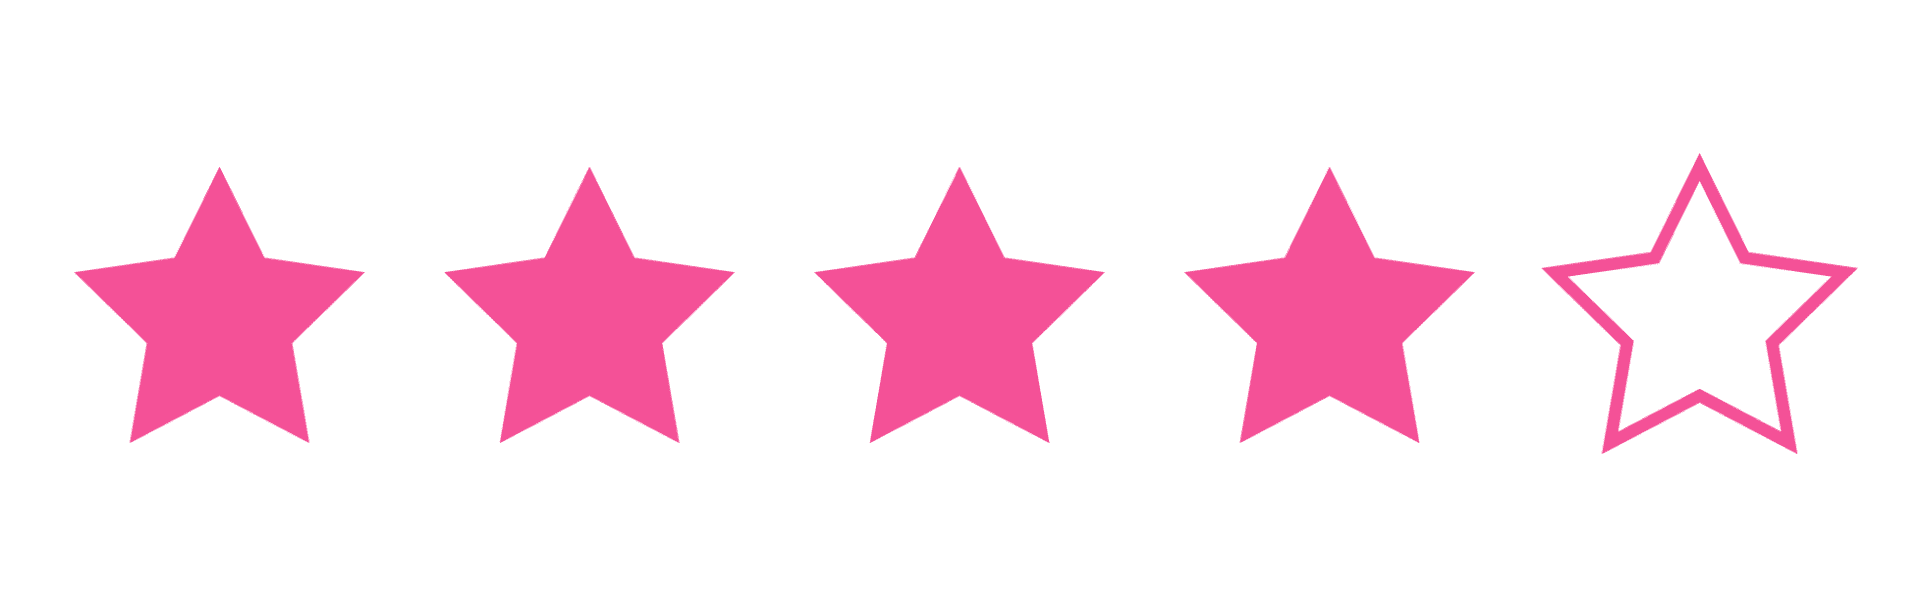 More than half (64%) of respondents expect a business to have at least a 4-star rating before using them.